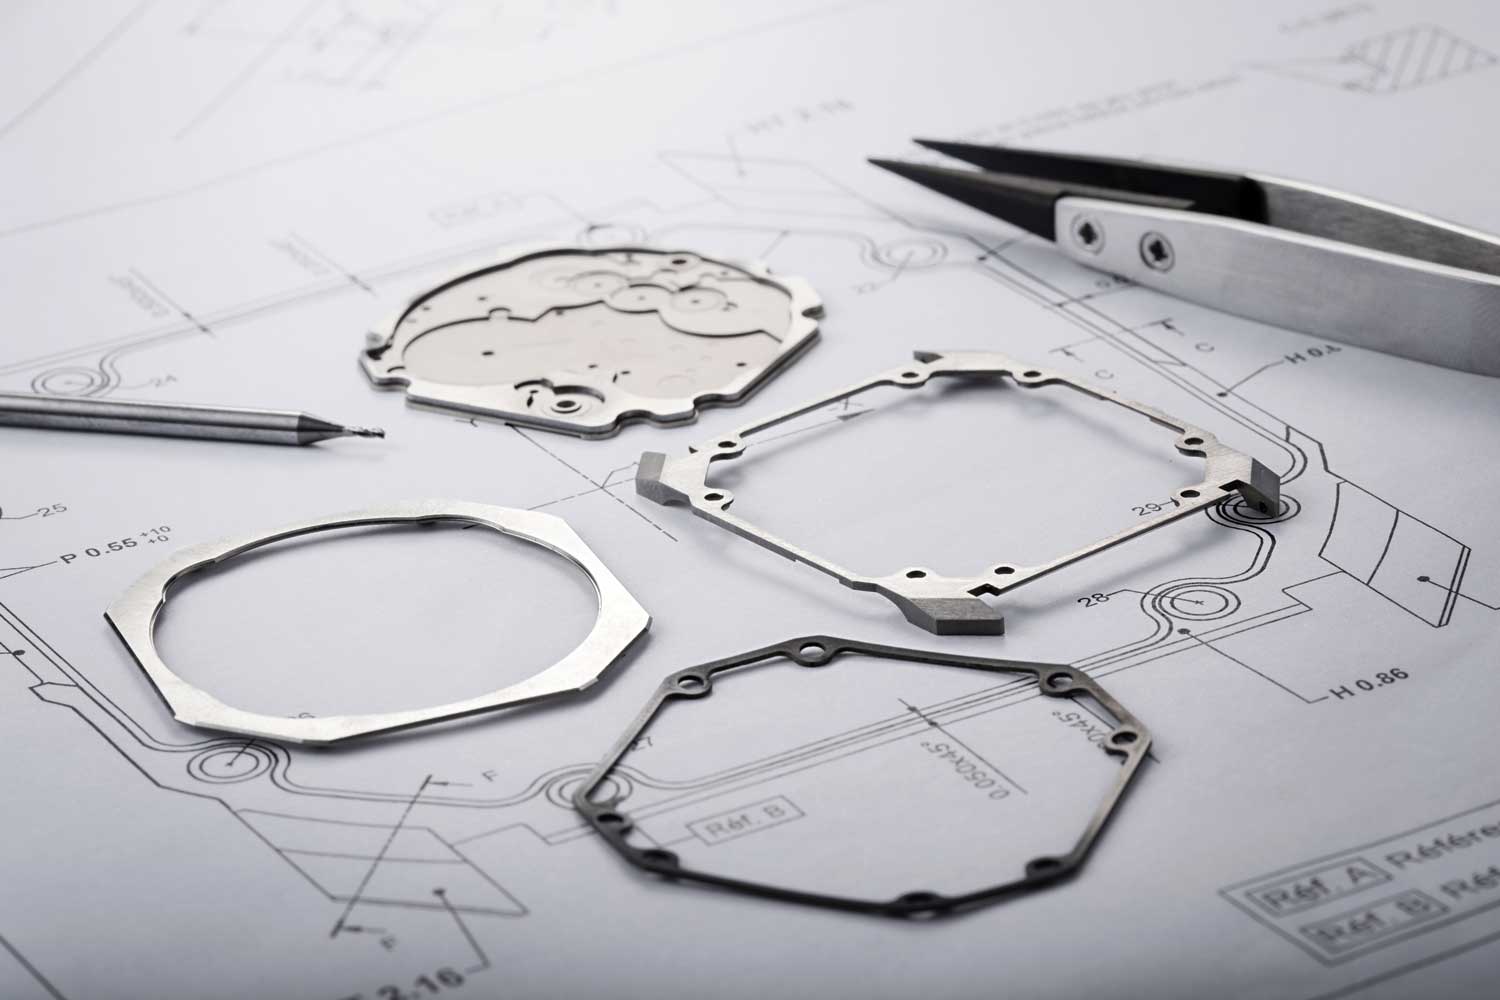 The Ultra’s full titanium case dismantled into its component parts. Clockwise from left: bezel, case back which doubles up as the main plate, case-middle with lugs, bezel gasket